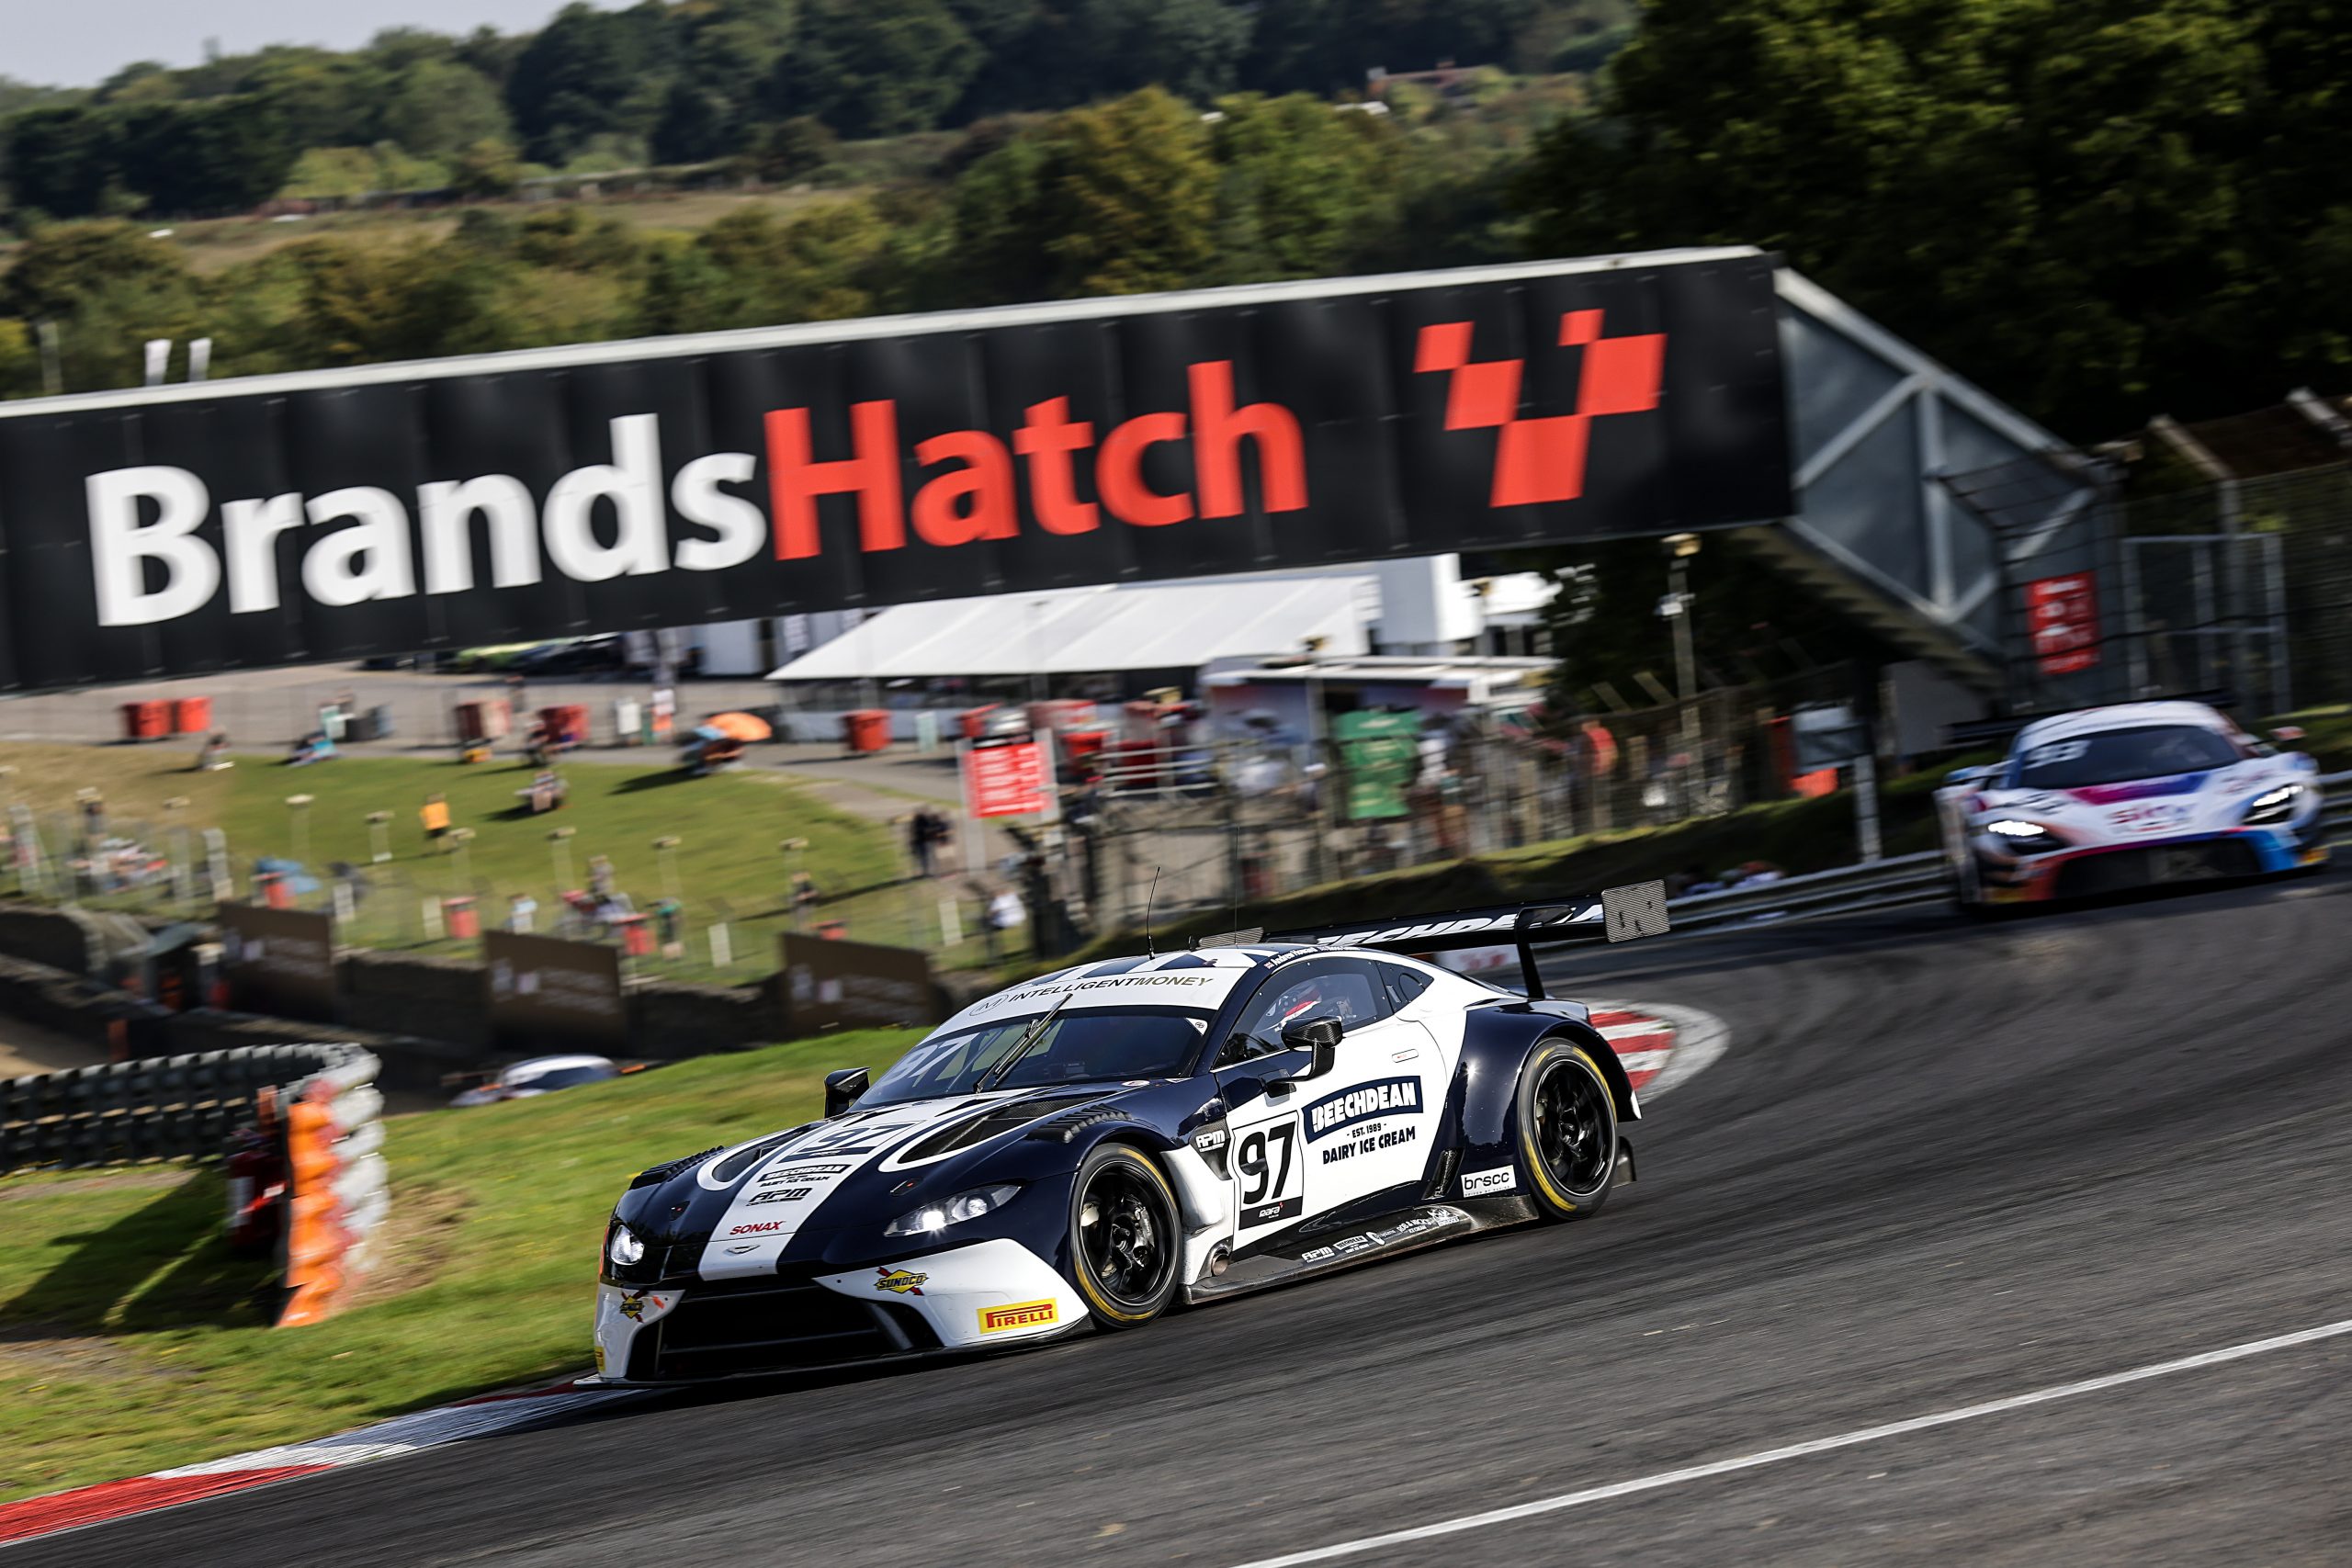 The Beechdean AMR Aston Martin claimed the first practice session at Brands Hatch thanks to Ross Gunn.